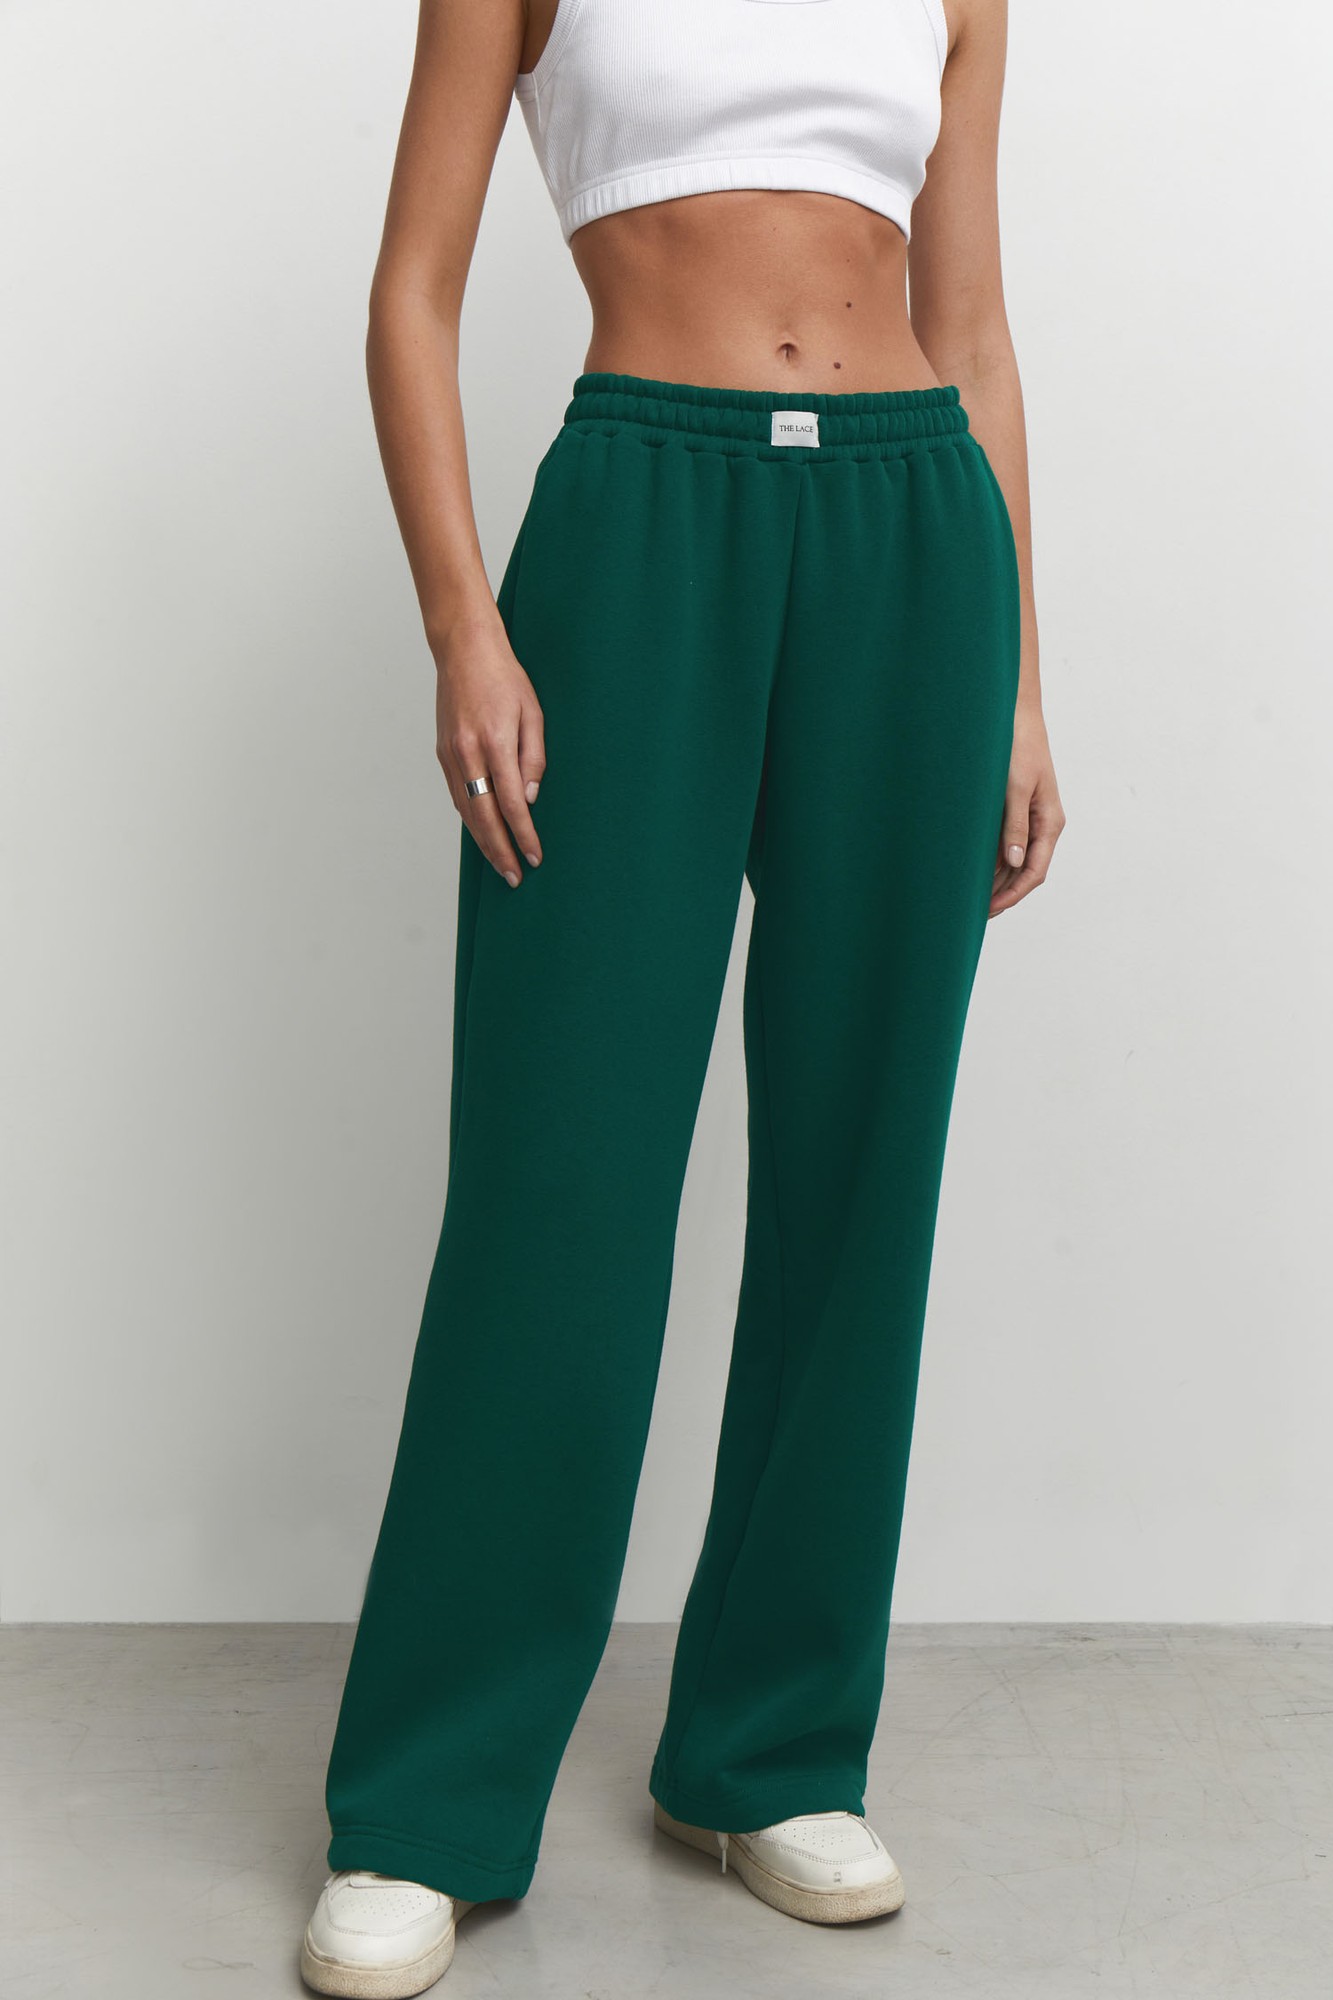 Wide jogger pants in green